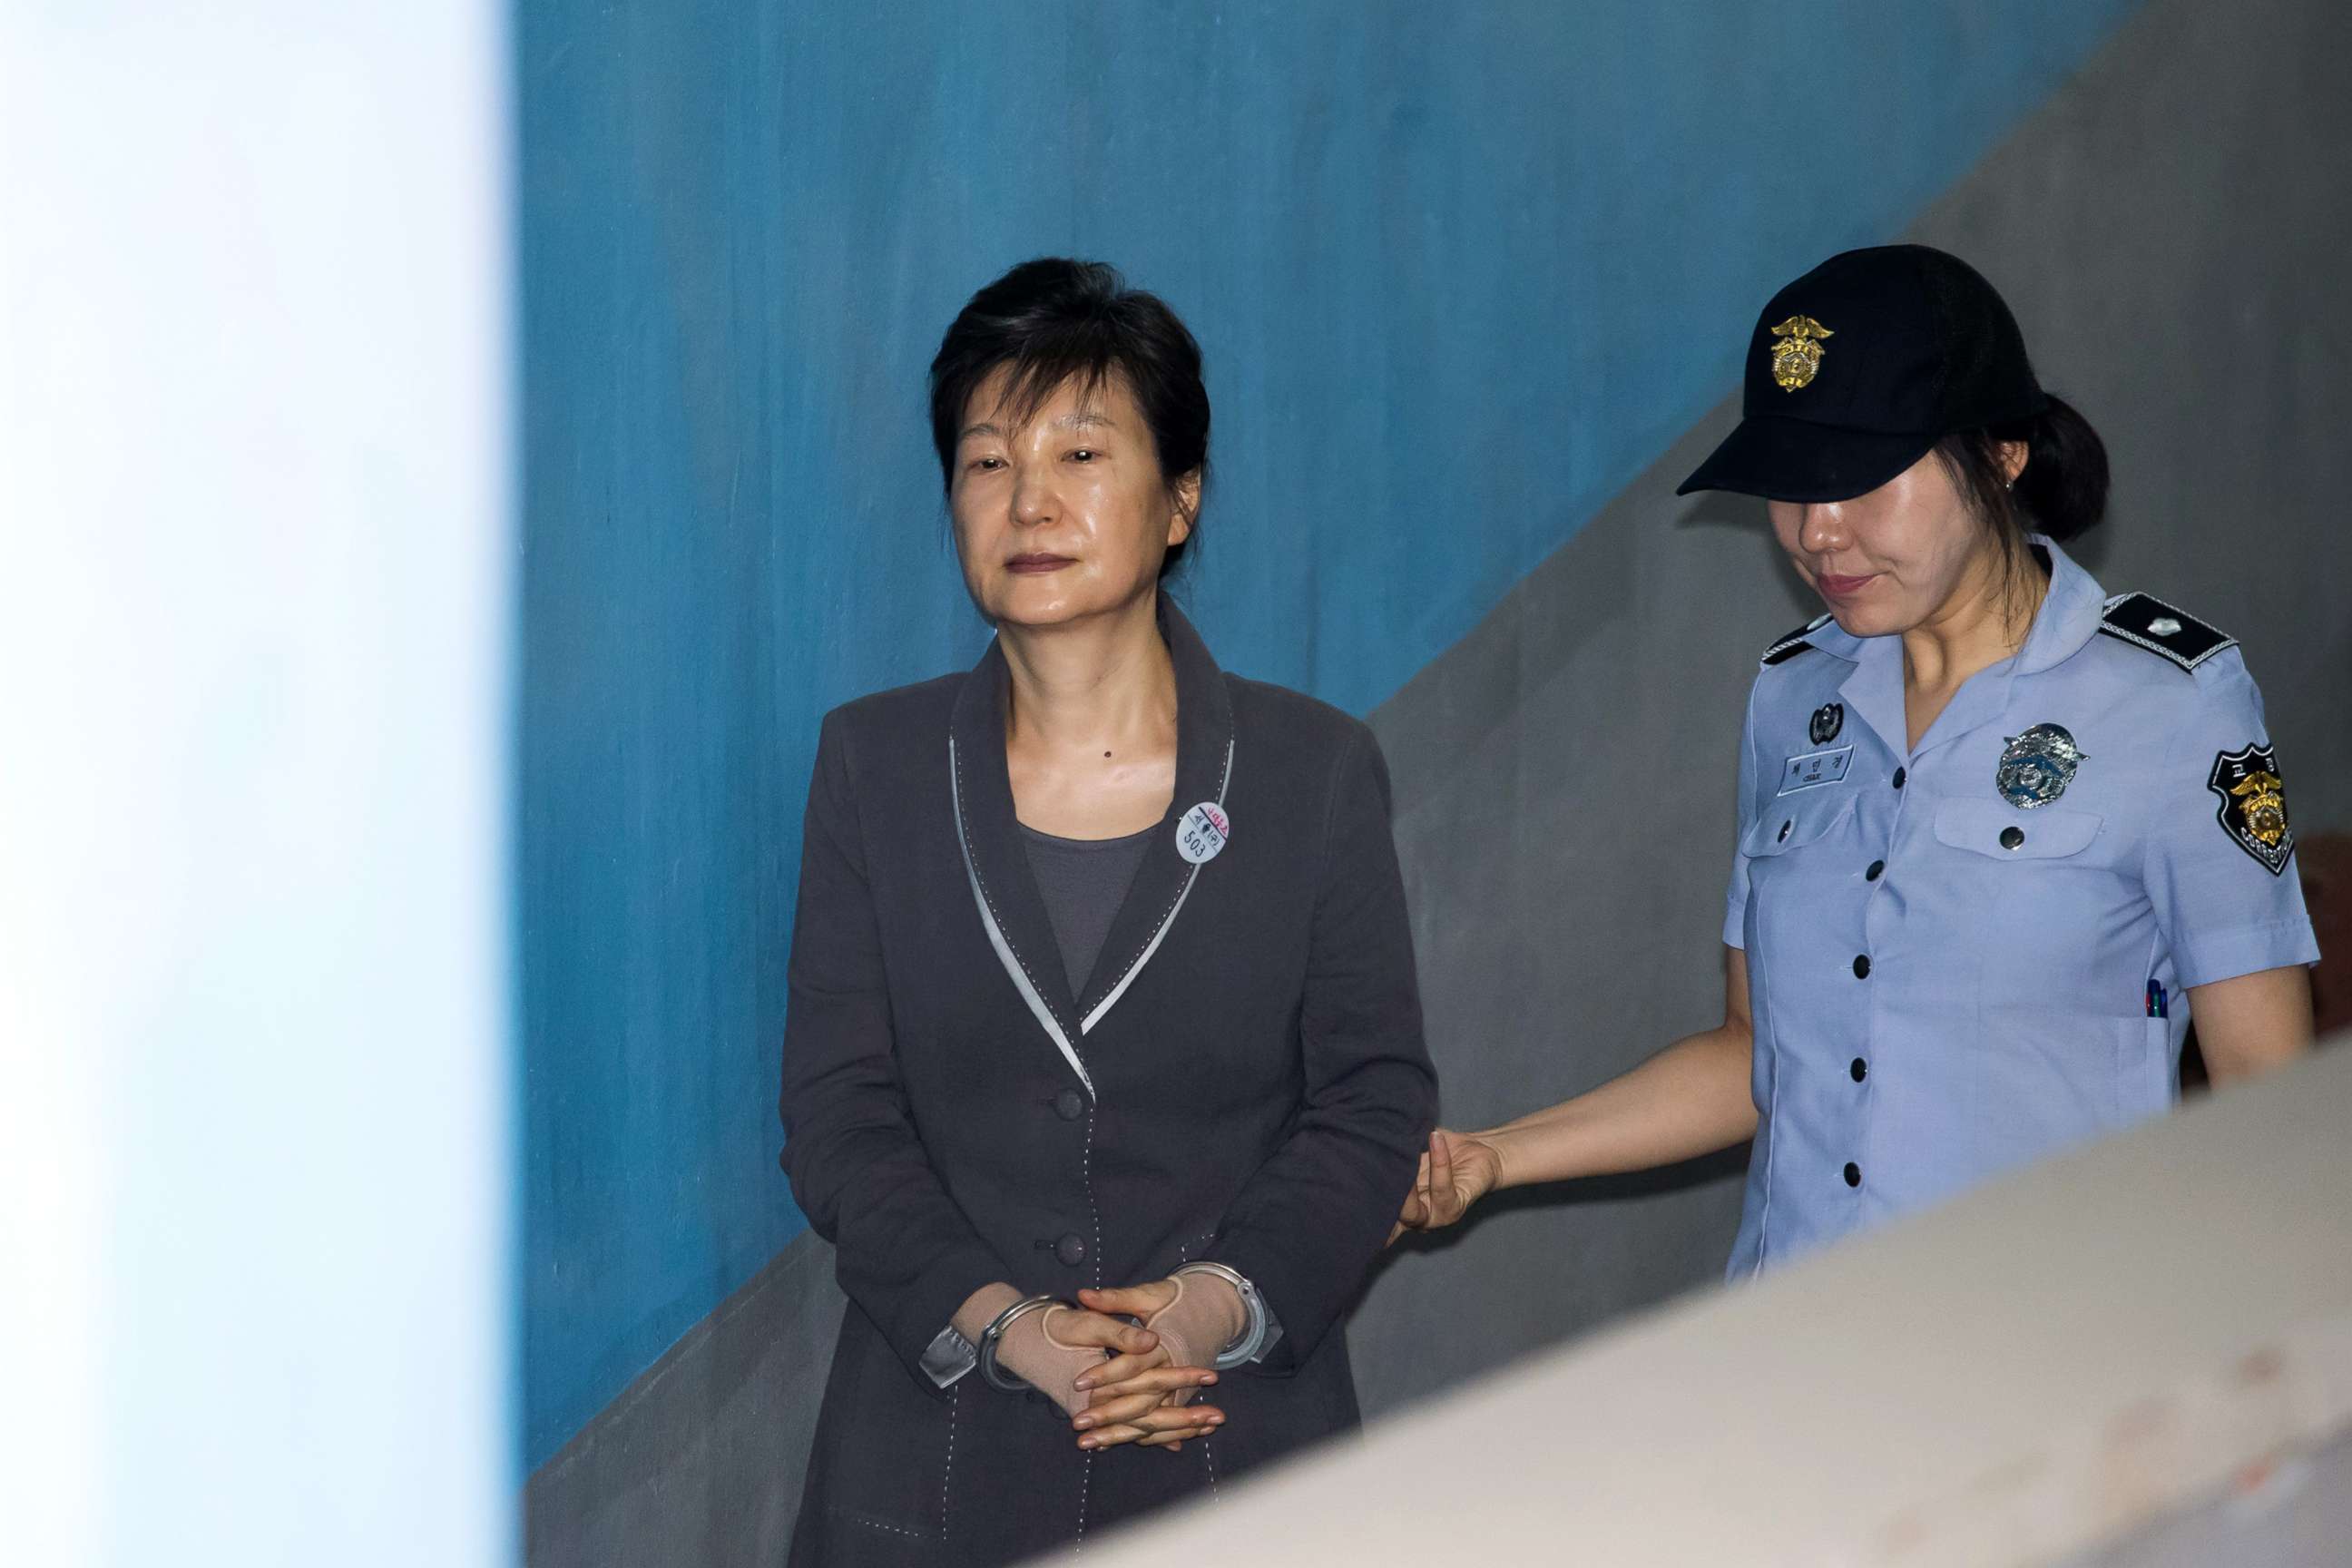 PHOTO: Park Geun-hye, former president of South Korea, is escorted by a prison officer as she arrives at the Seoul Central District Court in Seoul, South Korea, July 27, 2017. 